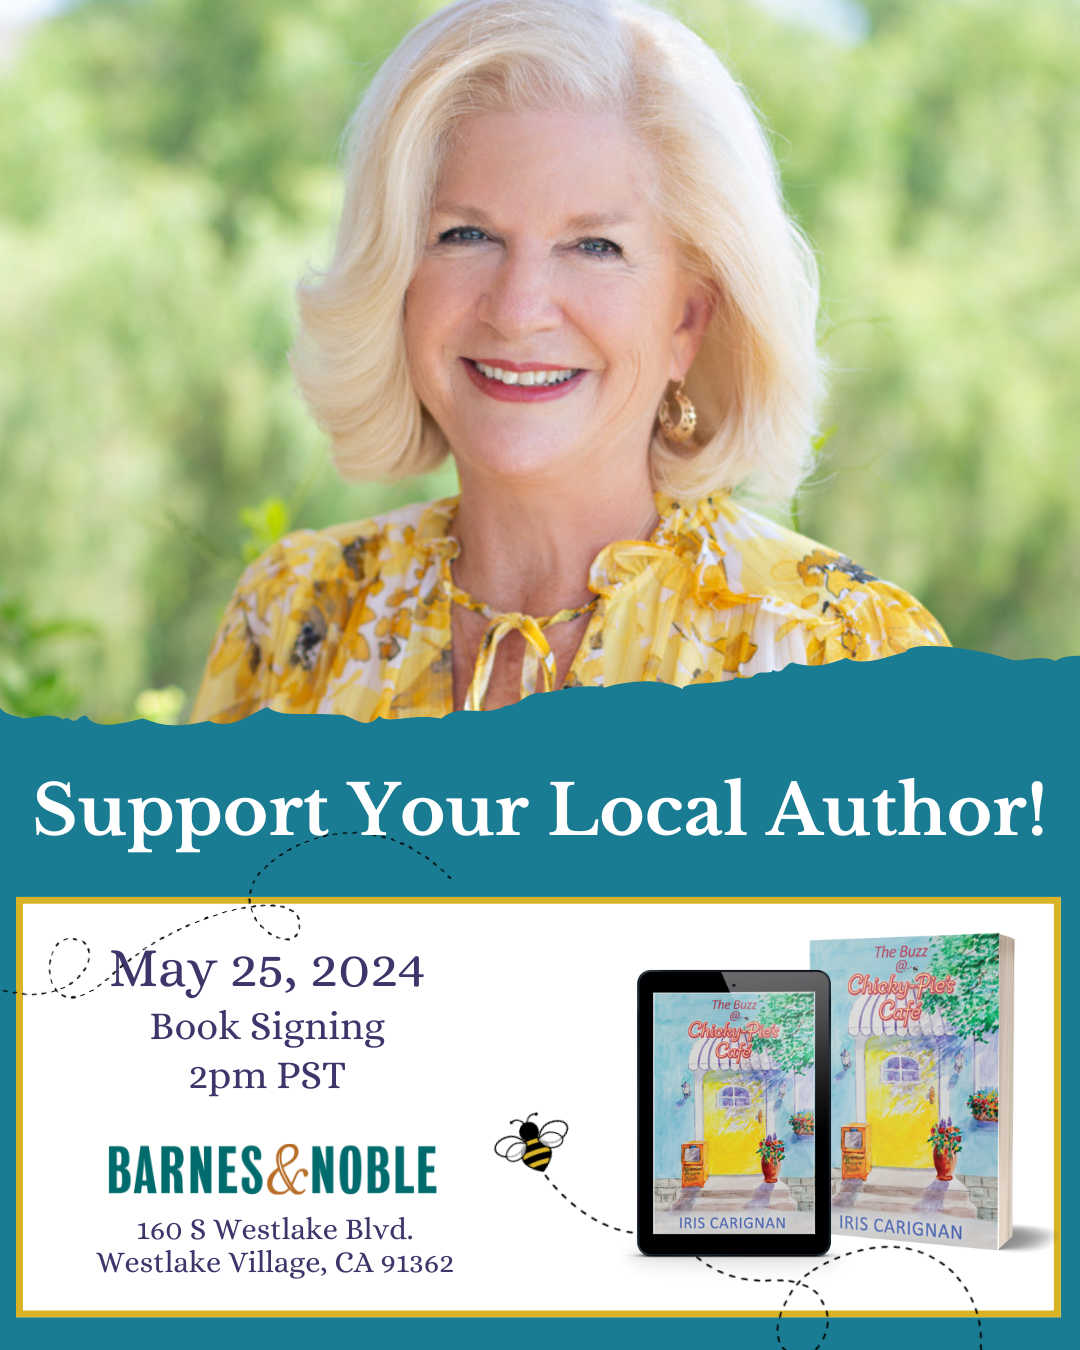 Barnes & Noble Book Signing Opportunity!